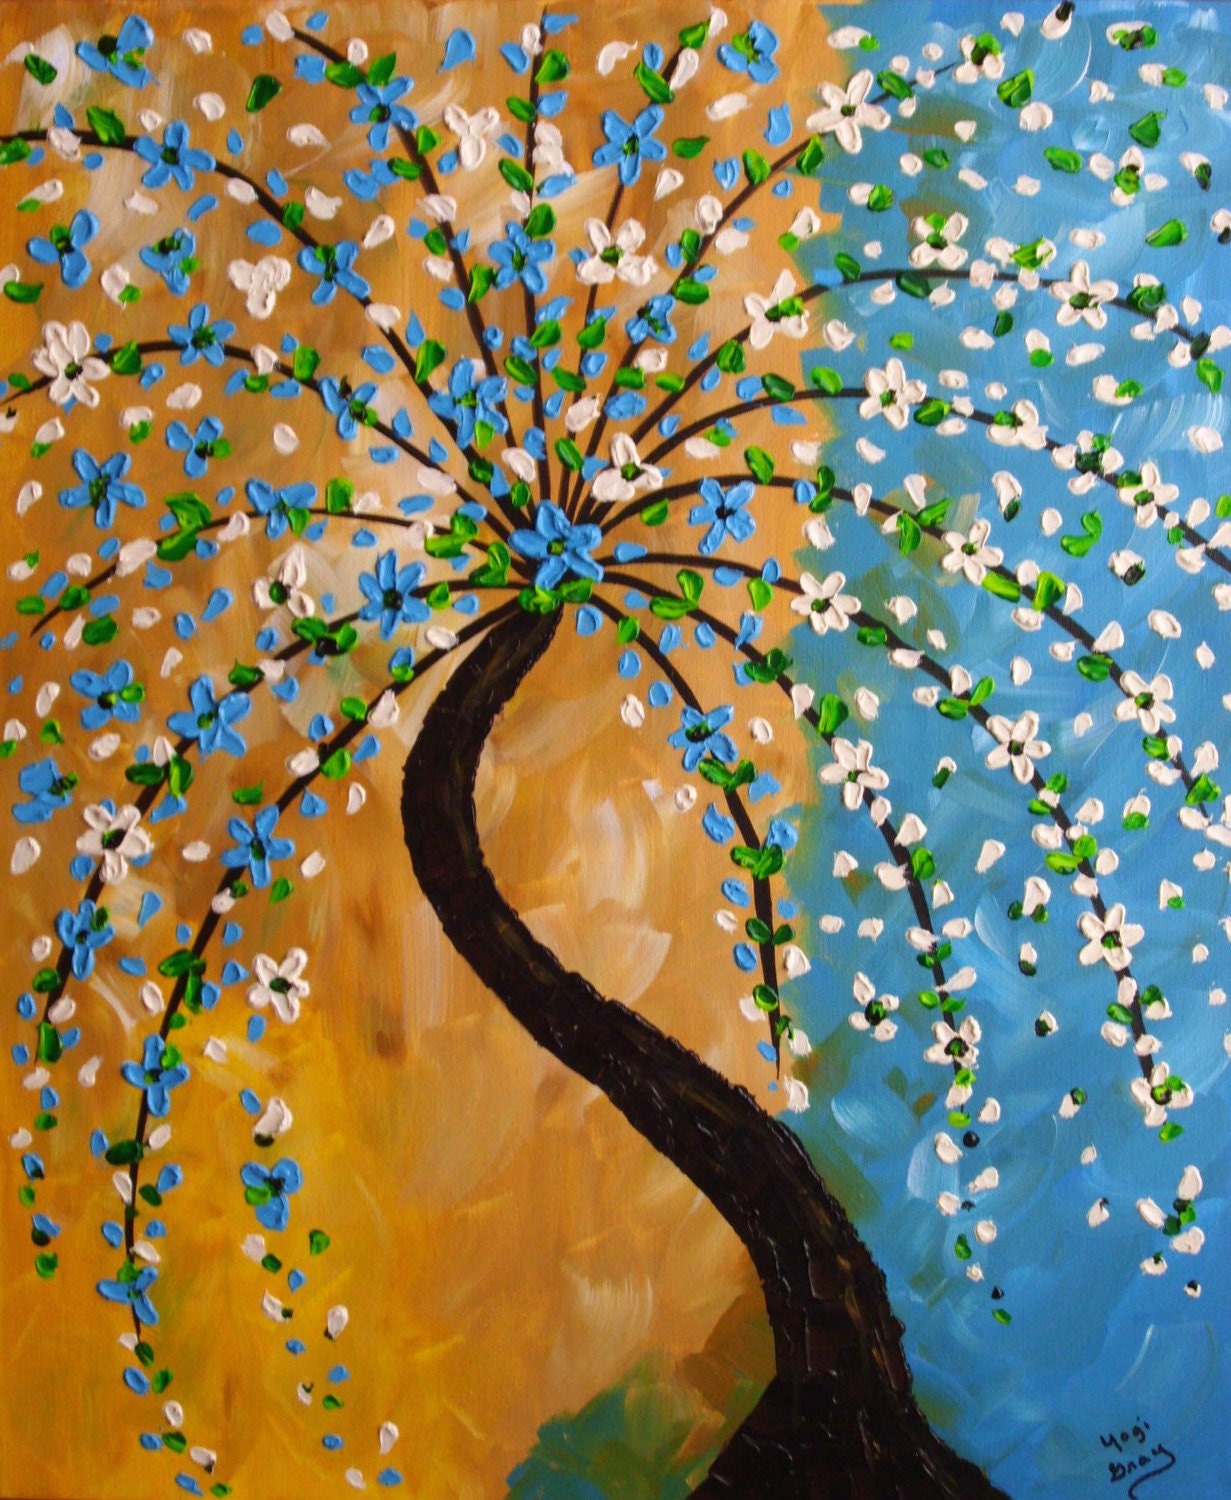 Contemporary Modern Abstract Blue and White Flower Tree 24x20